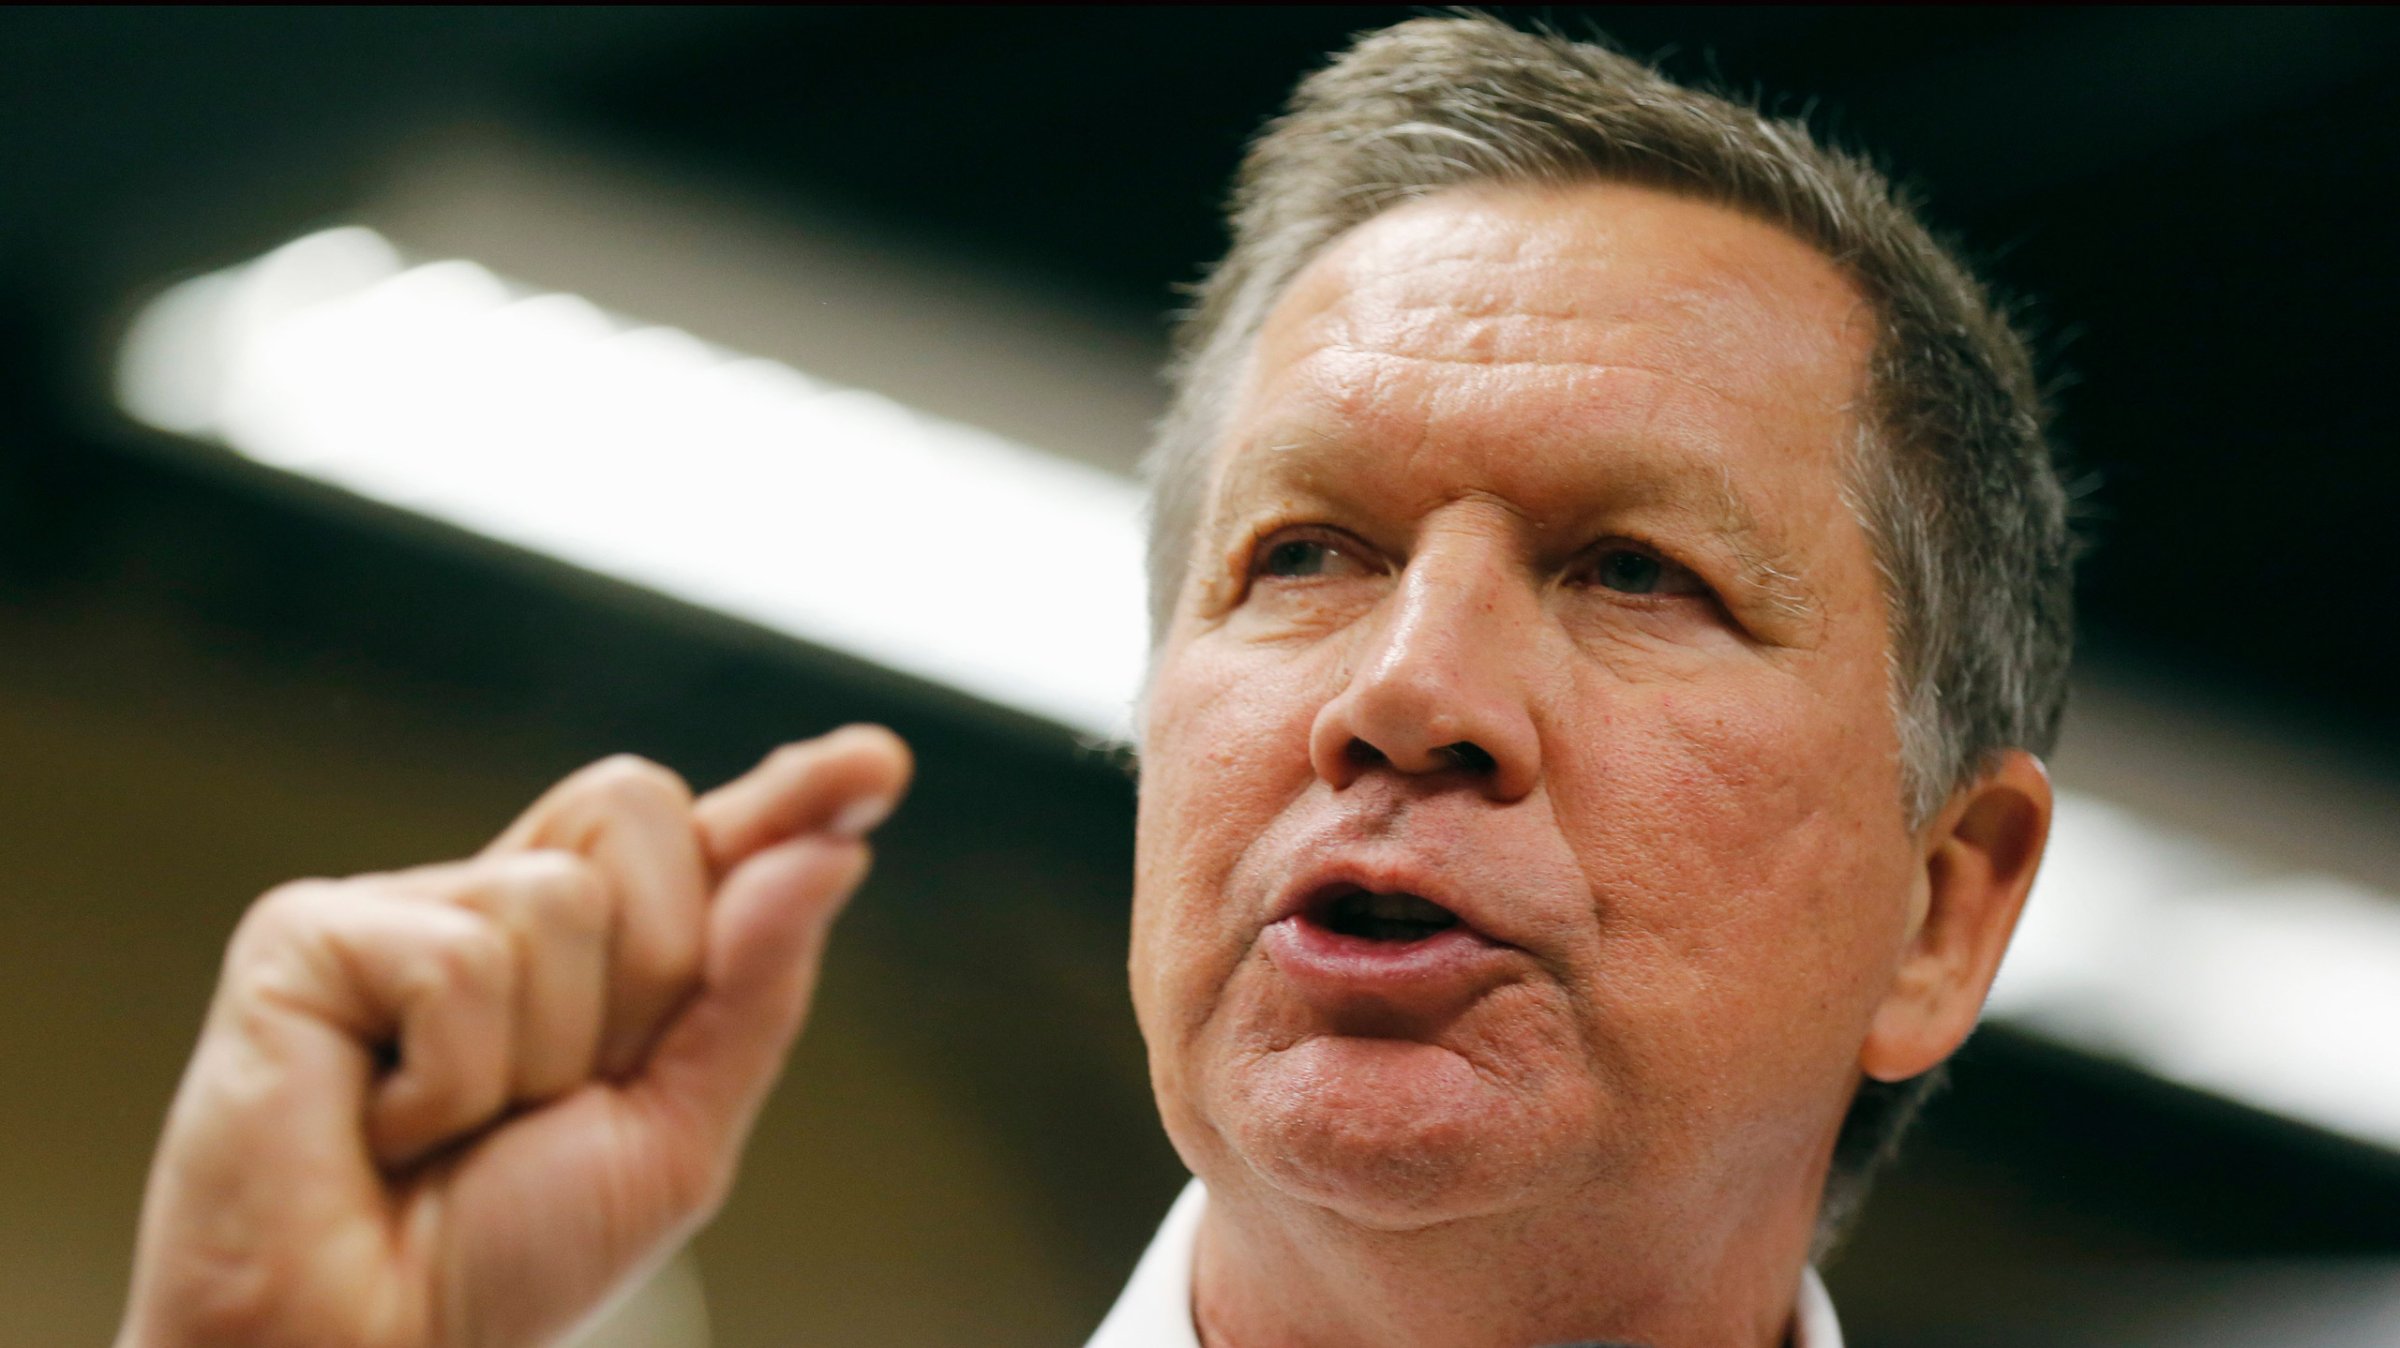 Republican presidential candidate, Ohio Gov. John Kasich speaks during a campaign stop in the meeting room of the Conway, N.H. public library, Friday, Jan. 15, 2016. (AP Photo/Jim Cole)